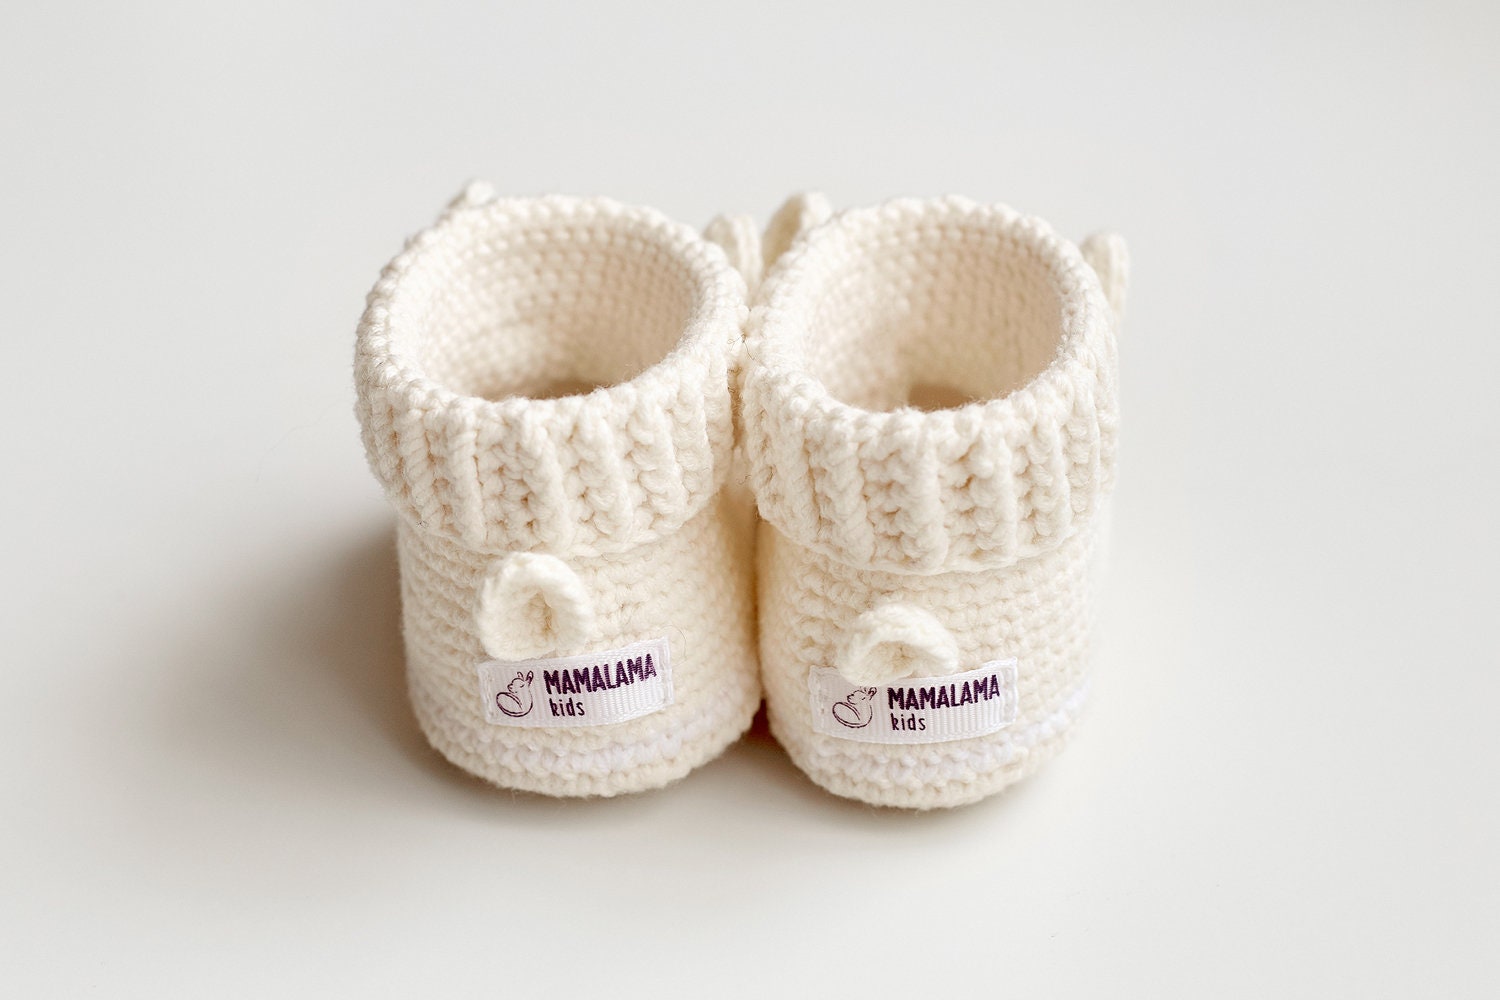 New mom gift sweet baby booties Crochet llama soft sole newborn shoes Pregnancy gift basket for mom to be Expecting baby reveal Schoenen 